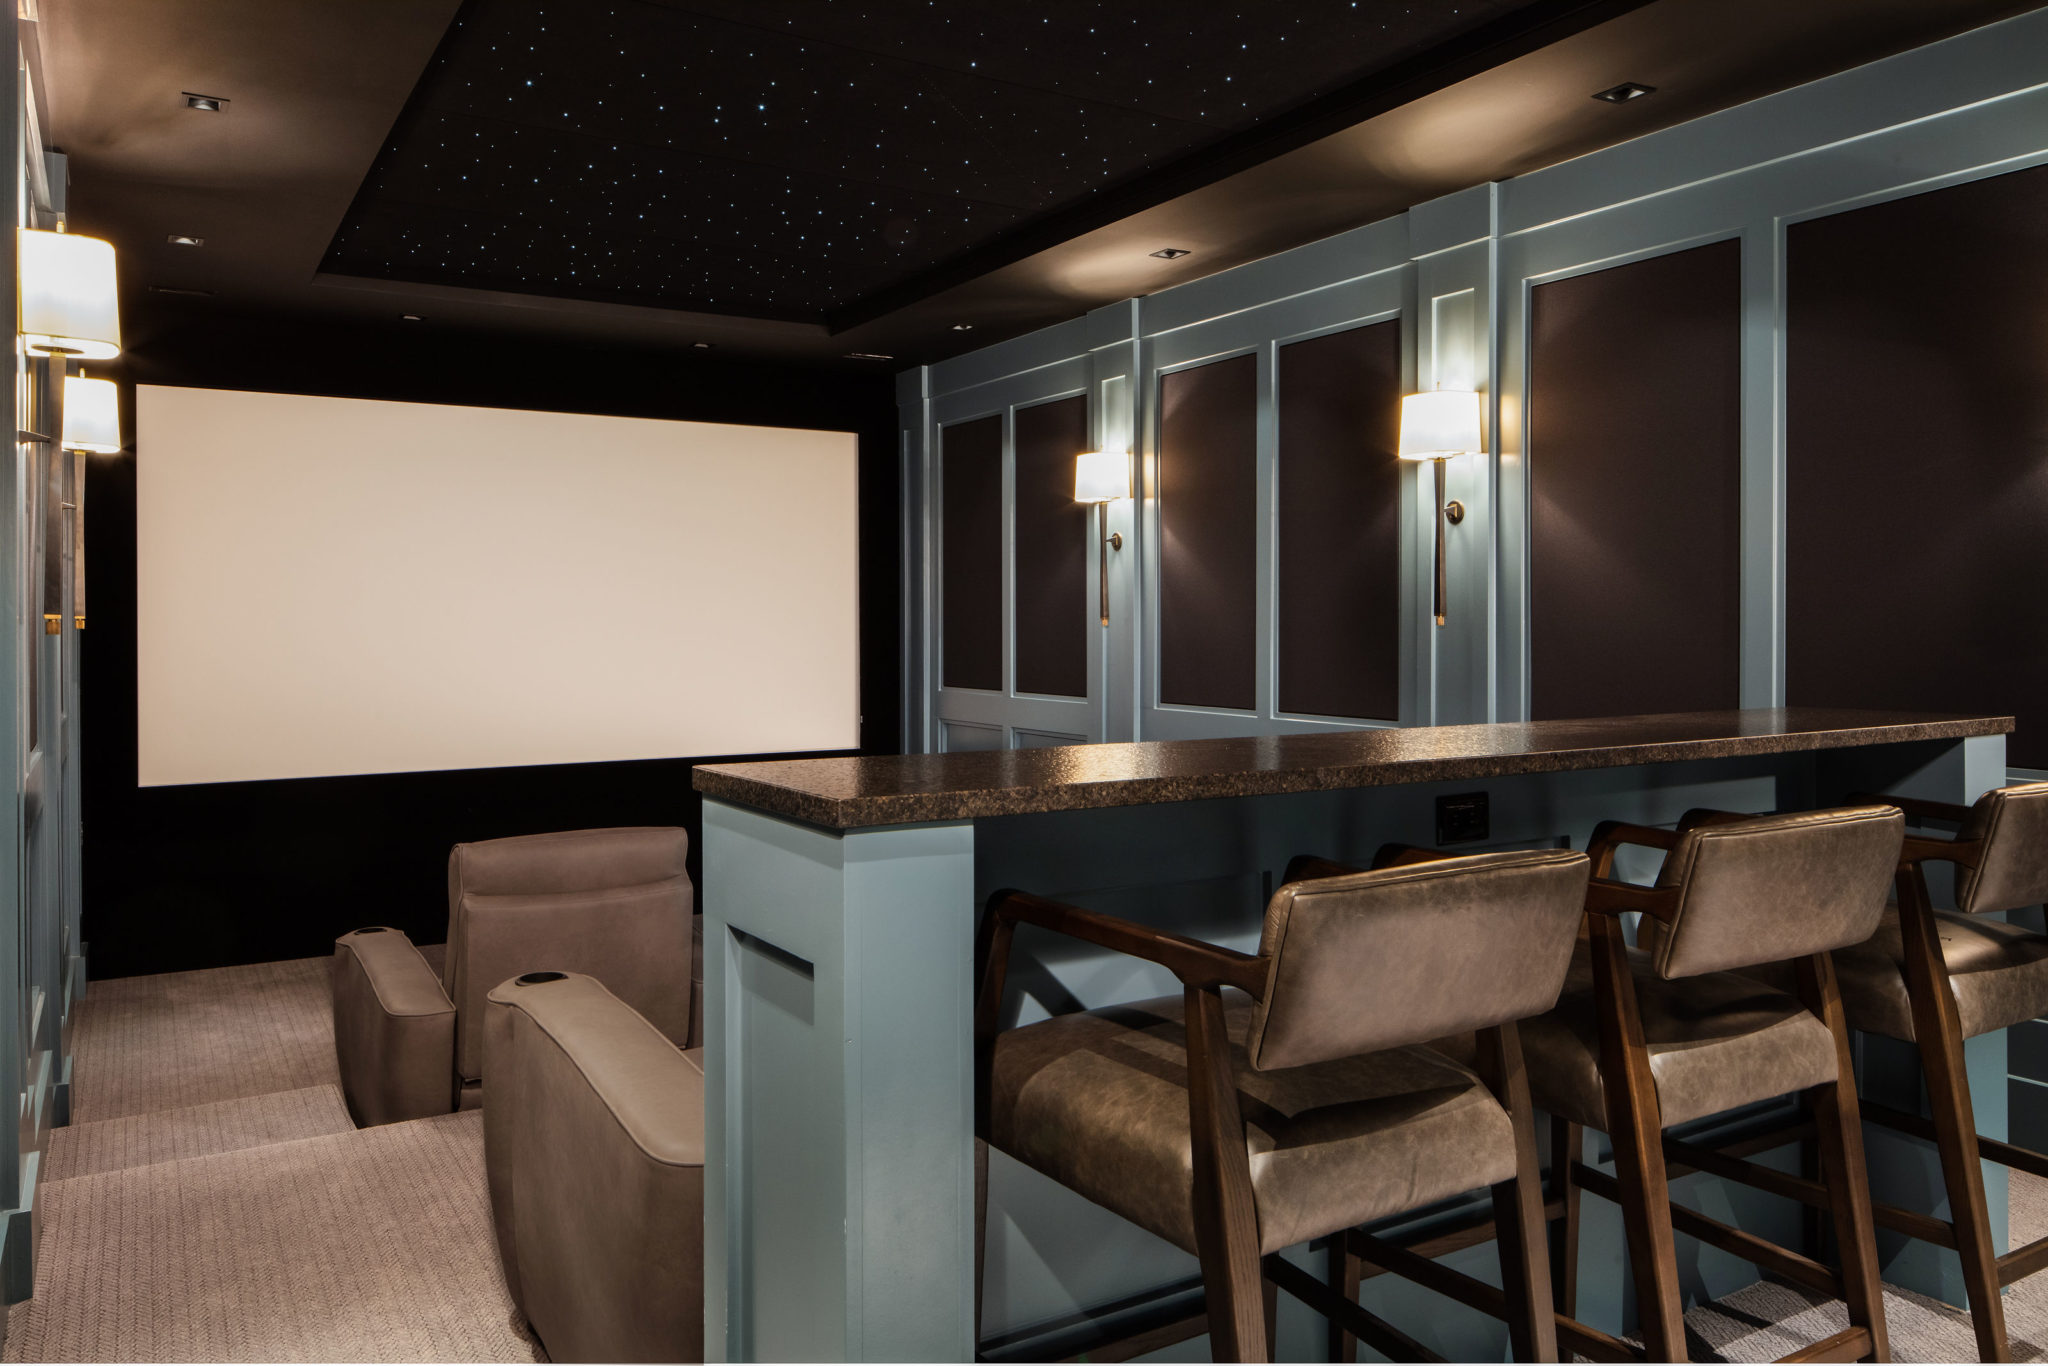 The Integration Guide to Projection Screens: Screening Rooms